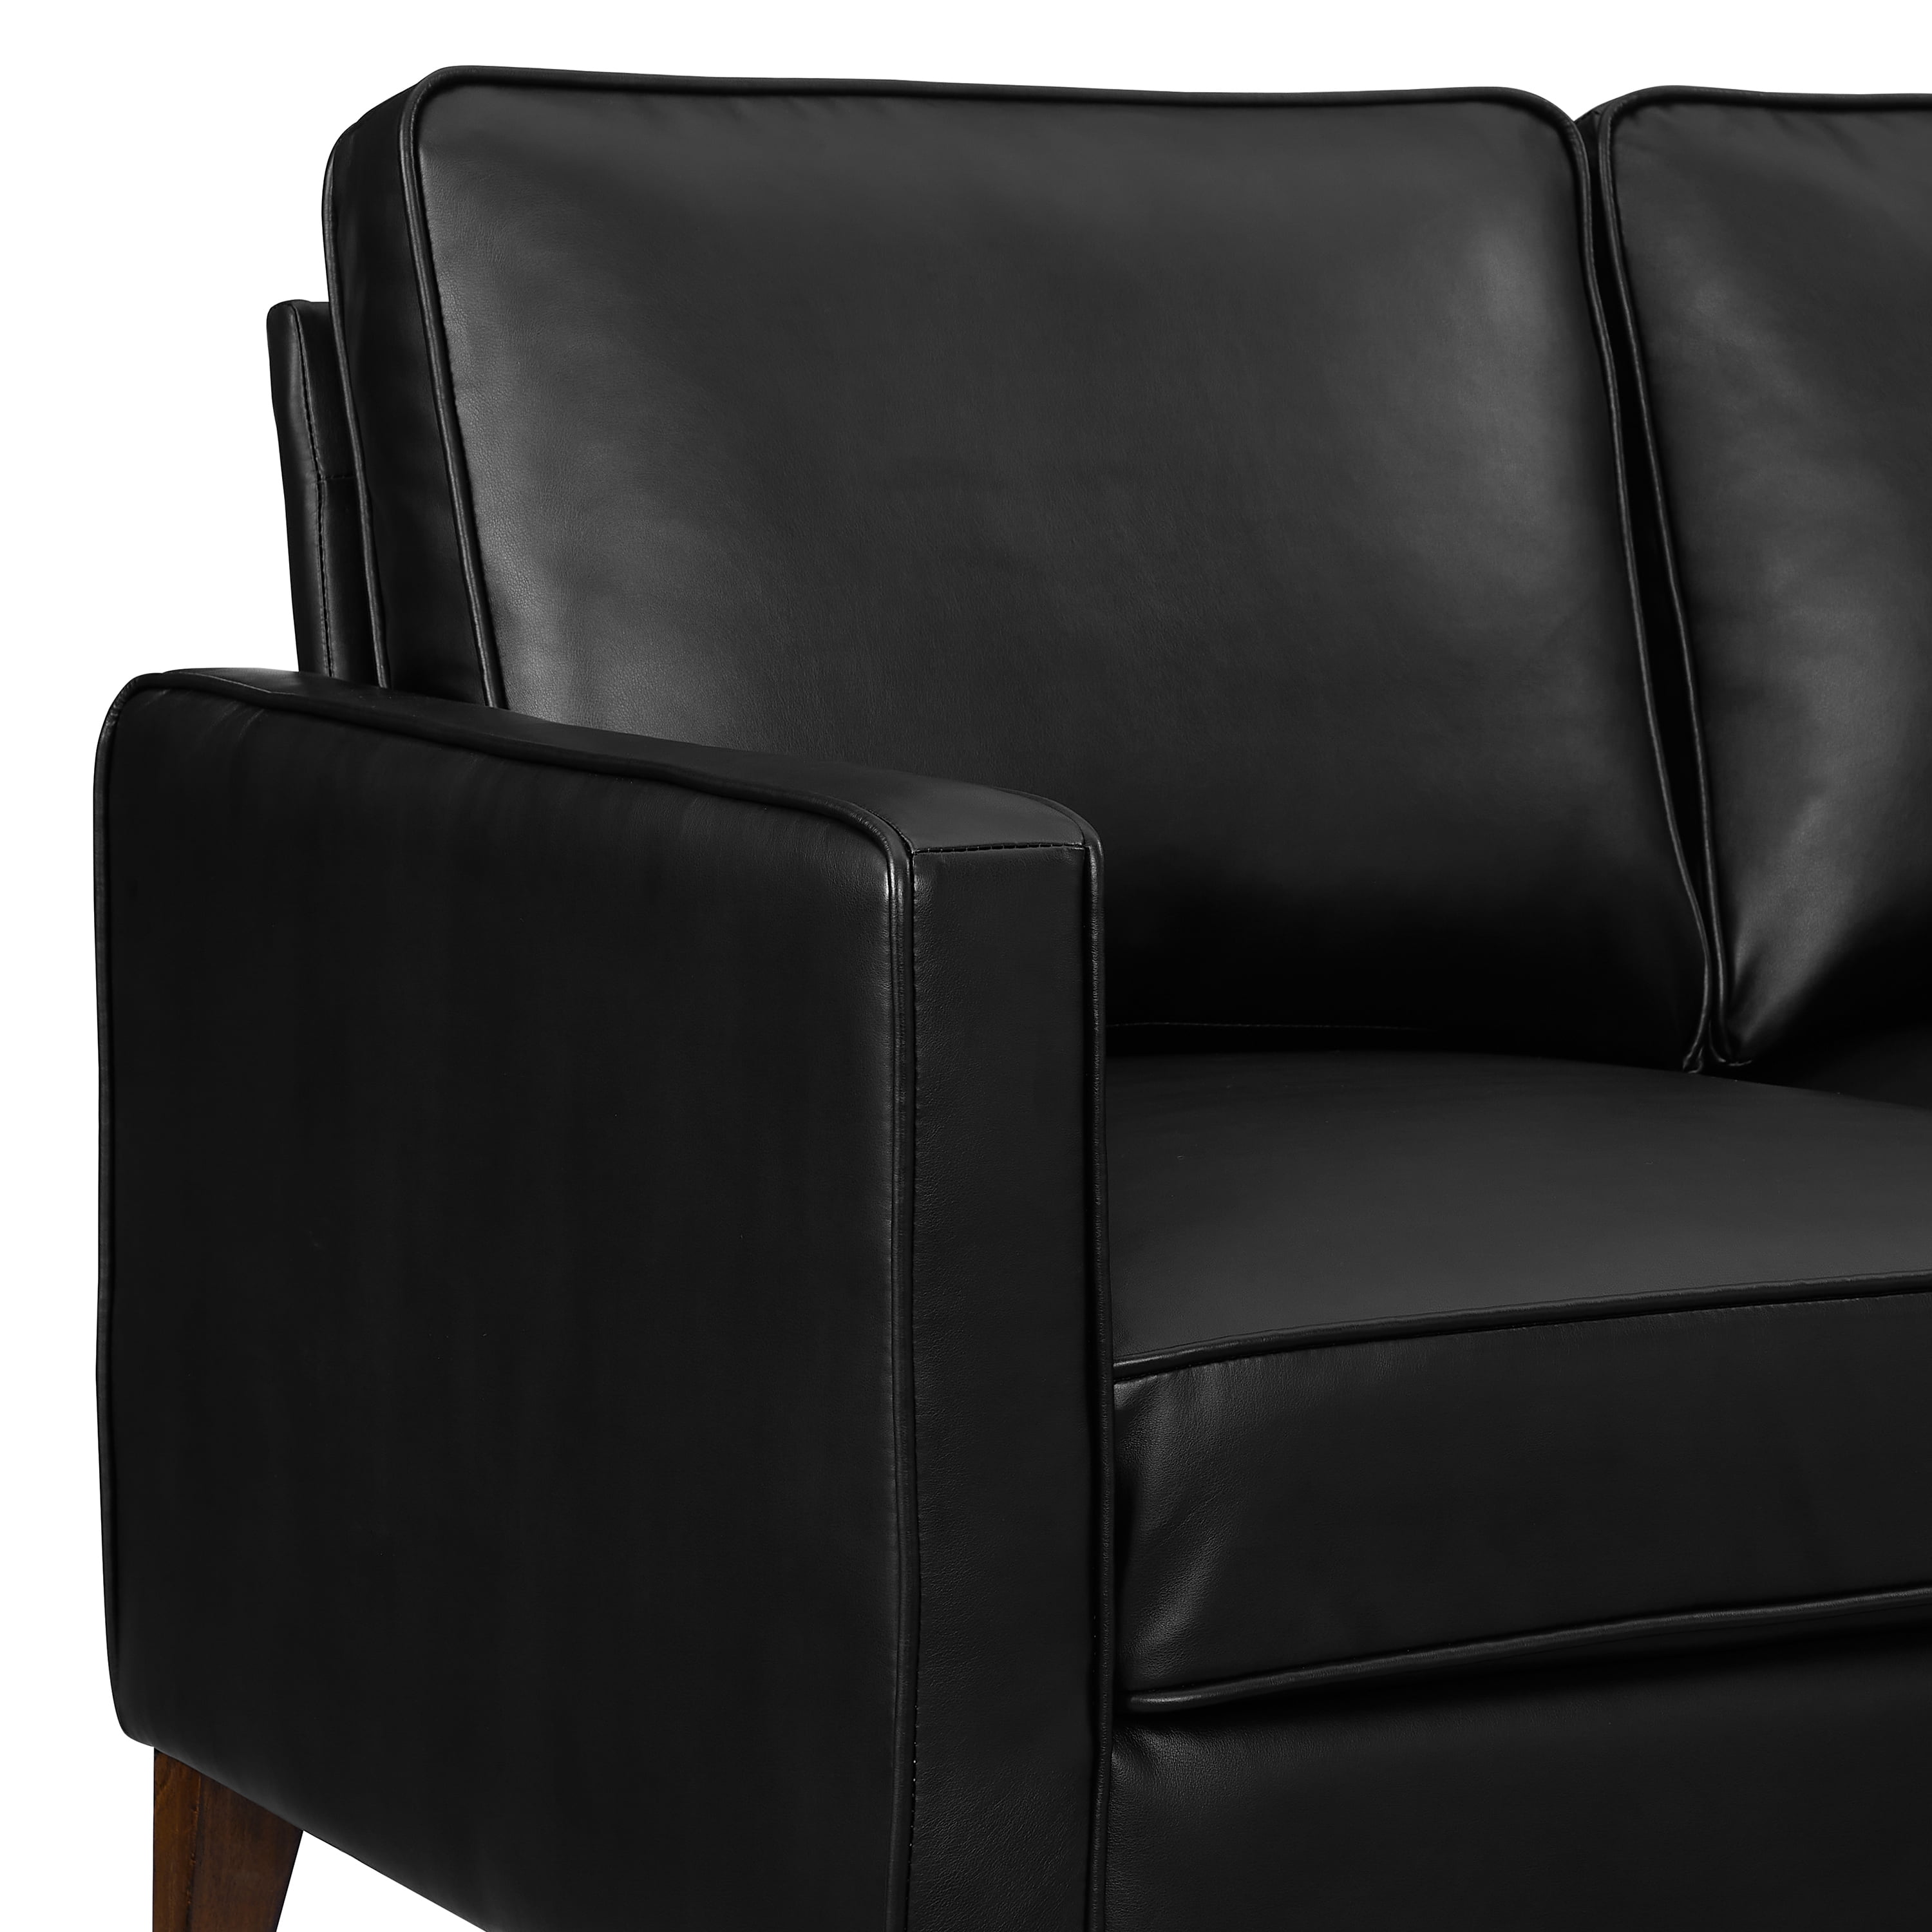 Used black faux leather couch - $80 : r/FullertonCollege